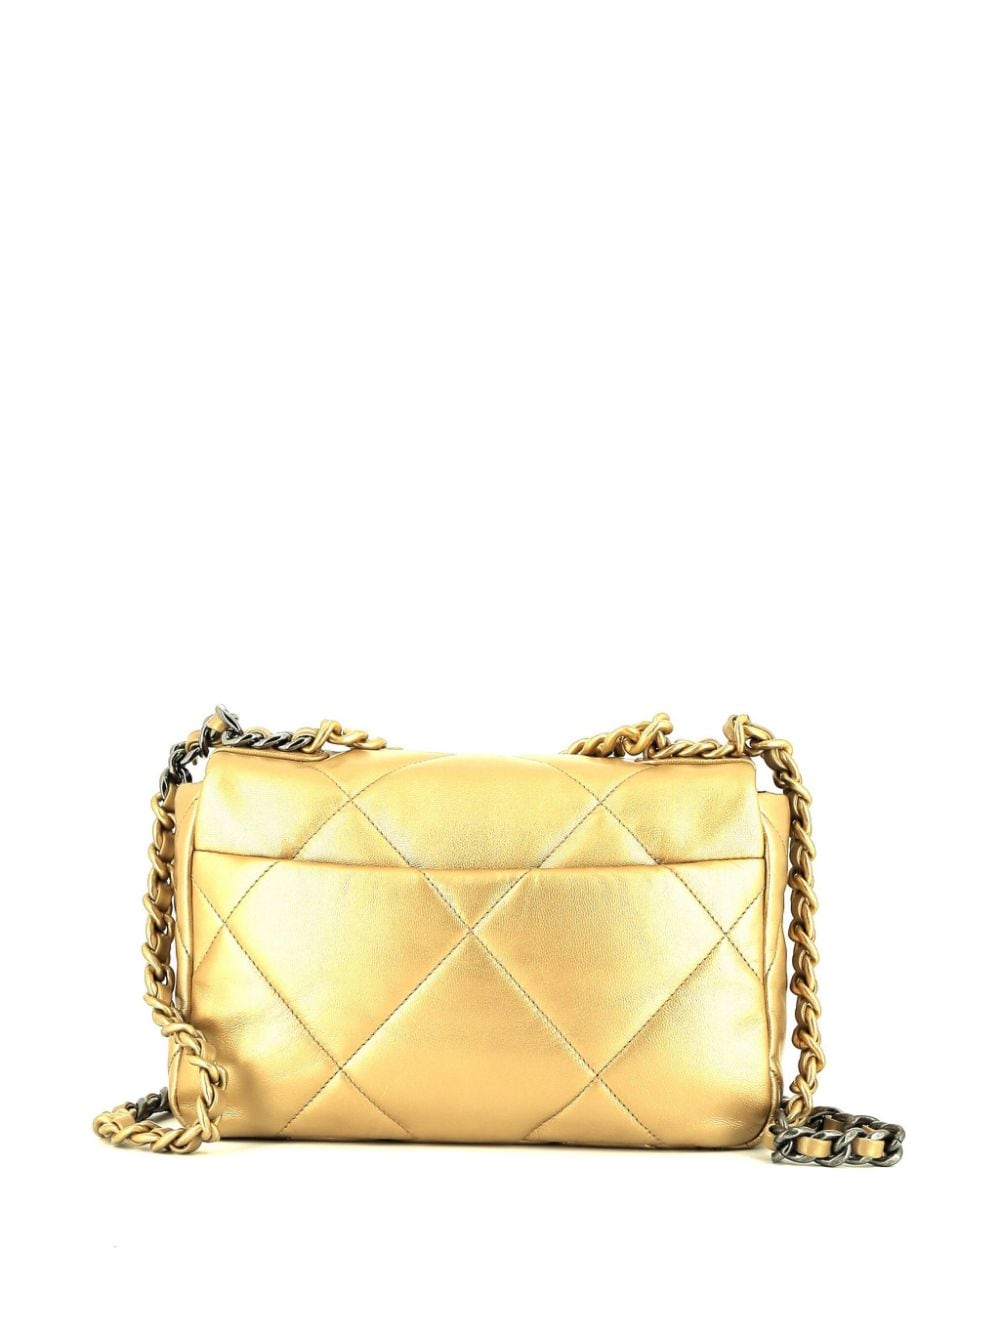 Pre-owned Chanel Classic Flap 19 填充单肩包（2021年典藏款） In Gold